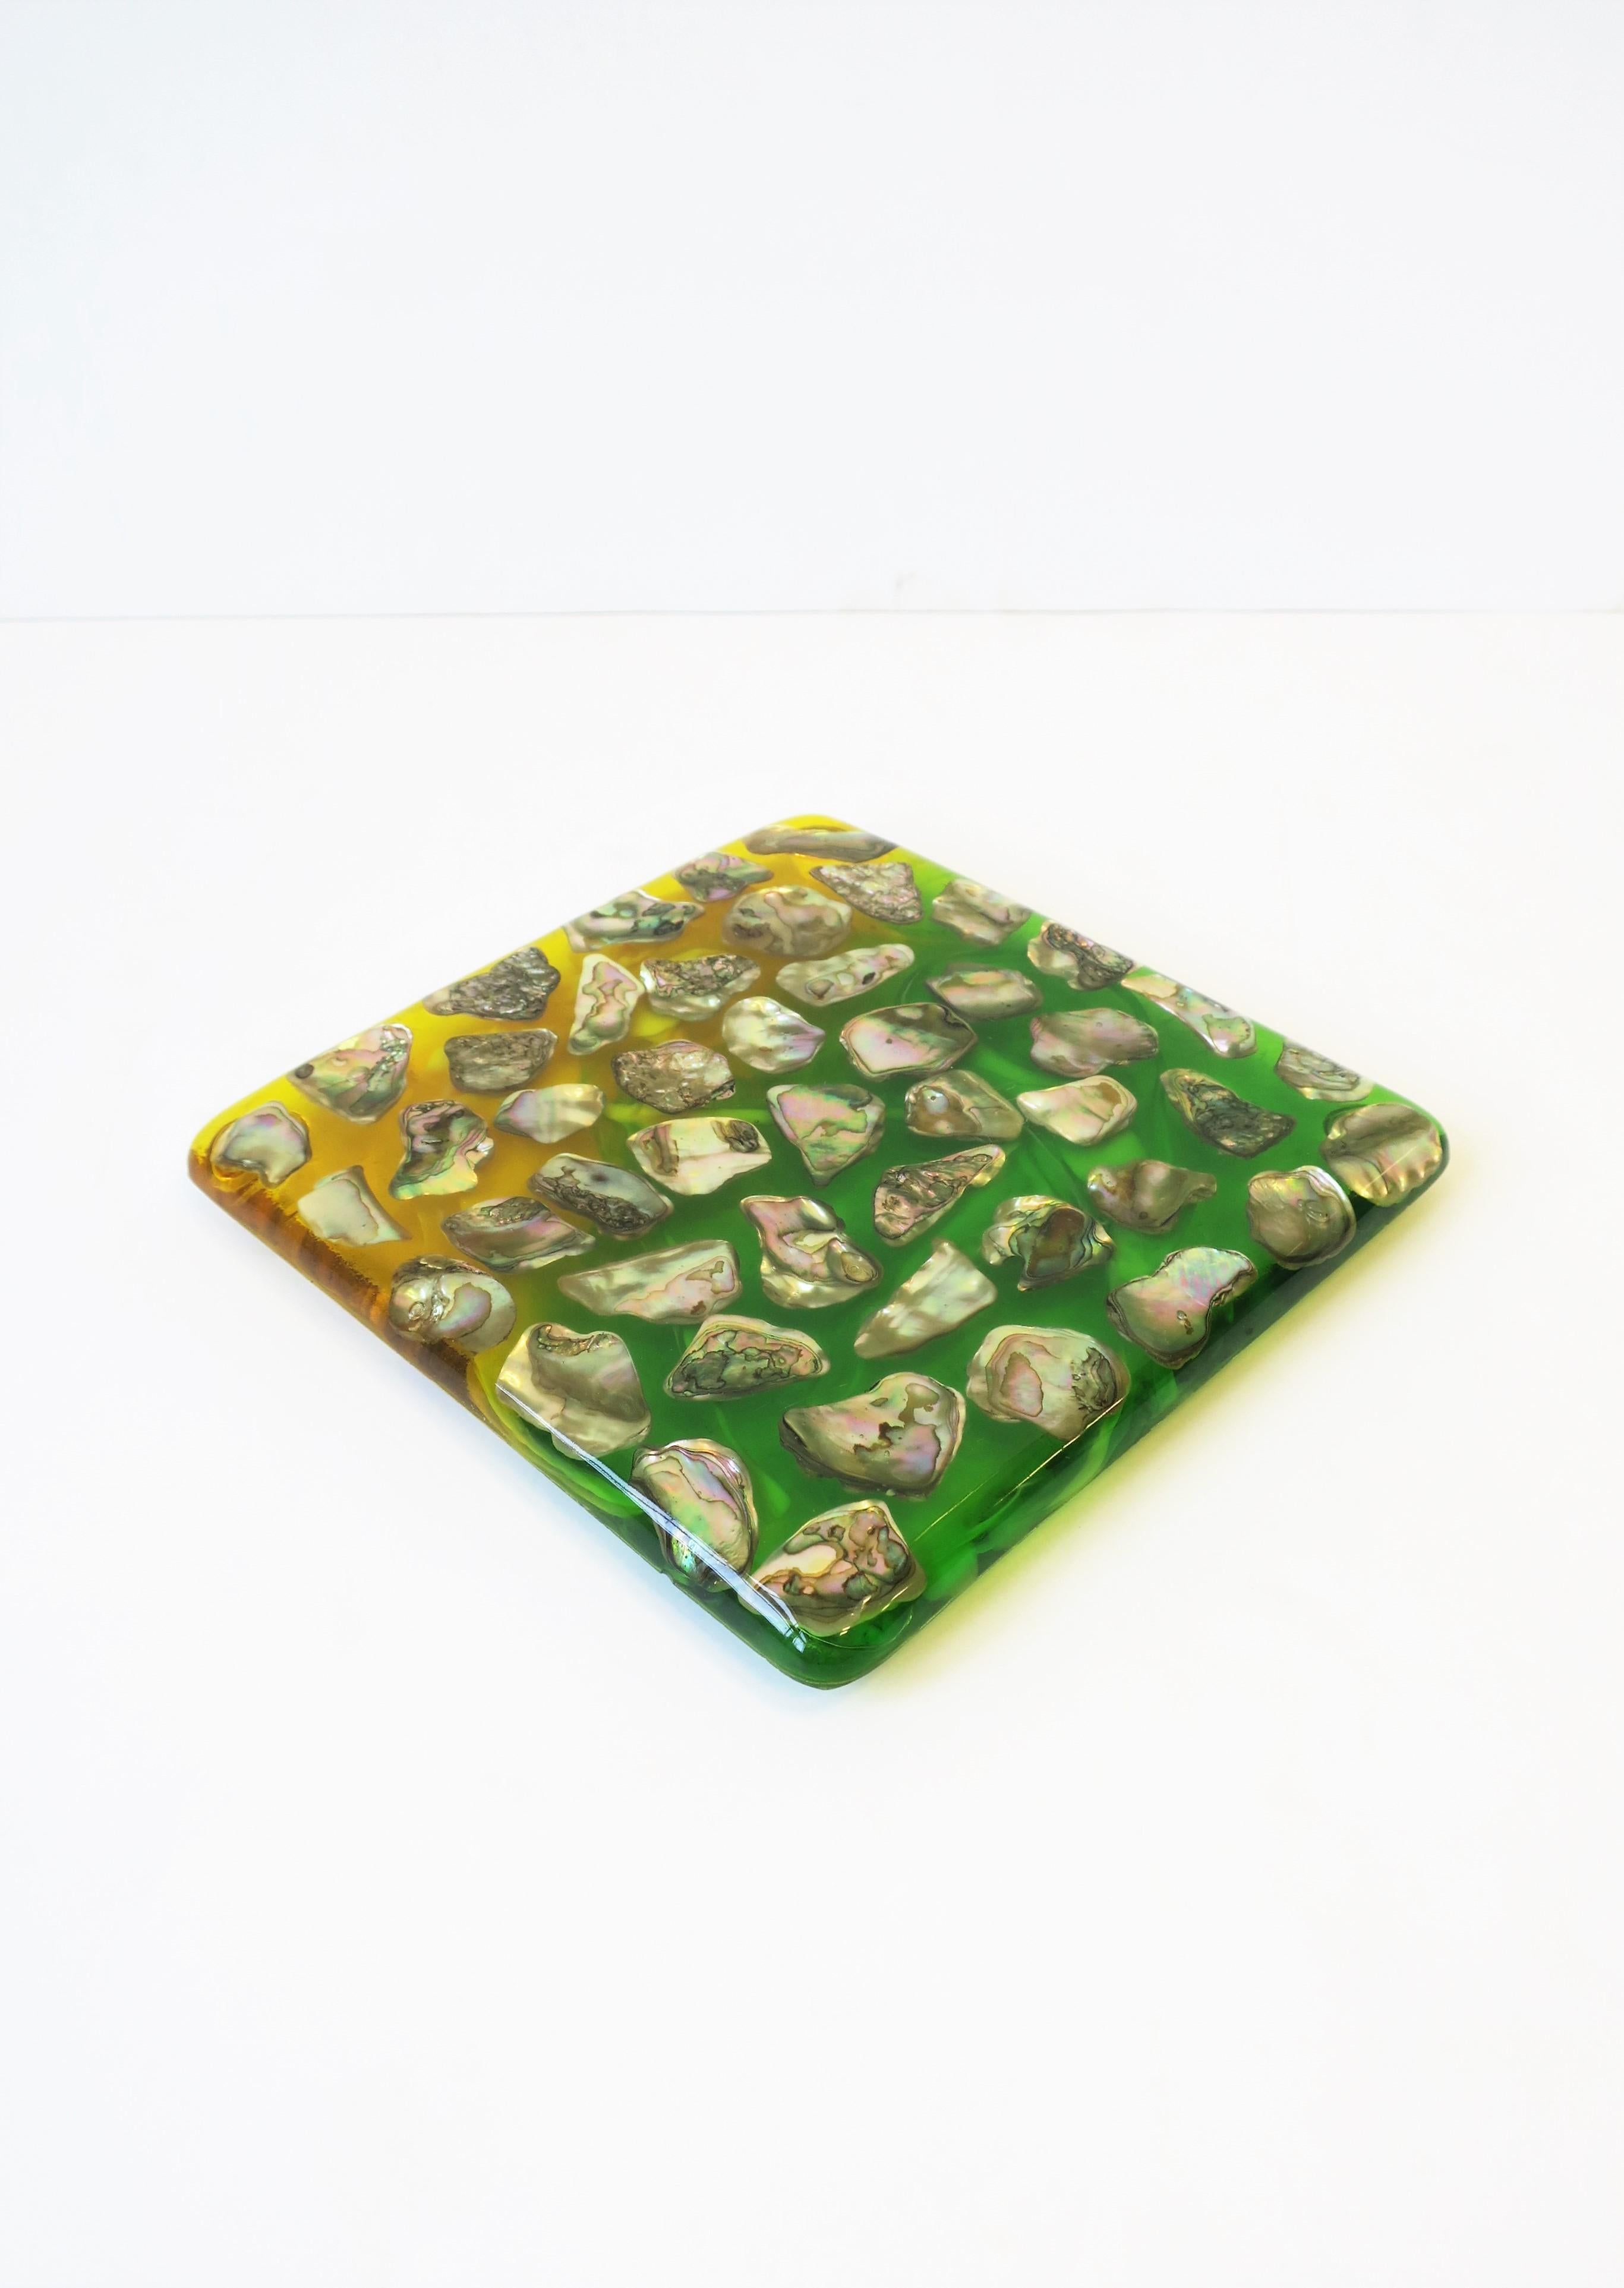 Abalone Seashell and Acrylic Bar Kitchen Table Trivet In Good Condition For Sale In New York, NY